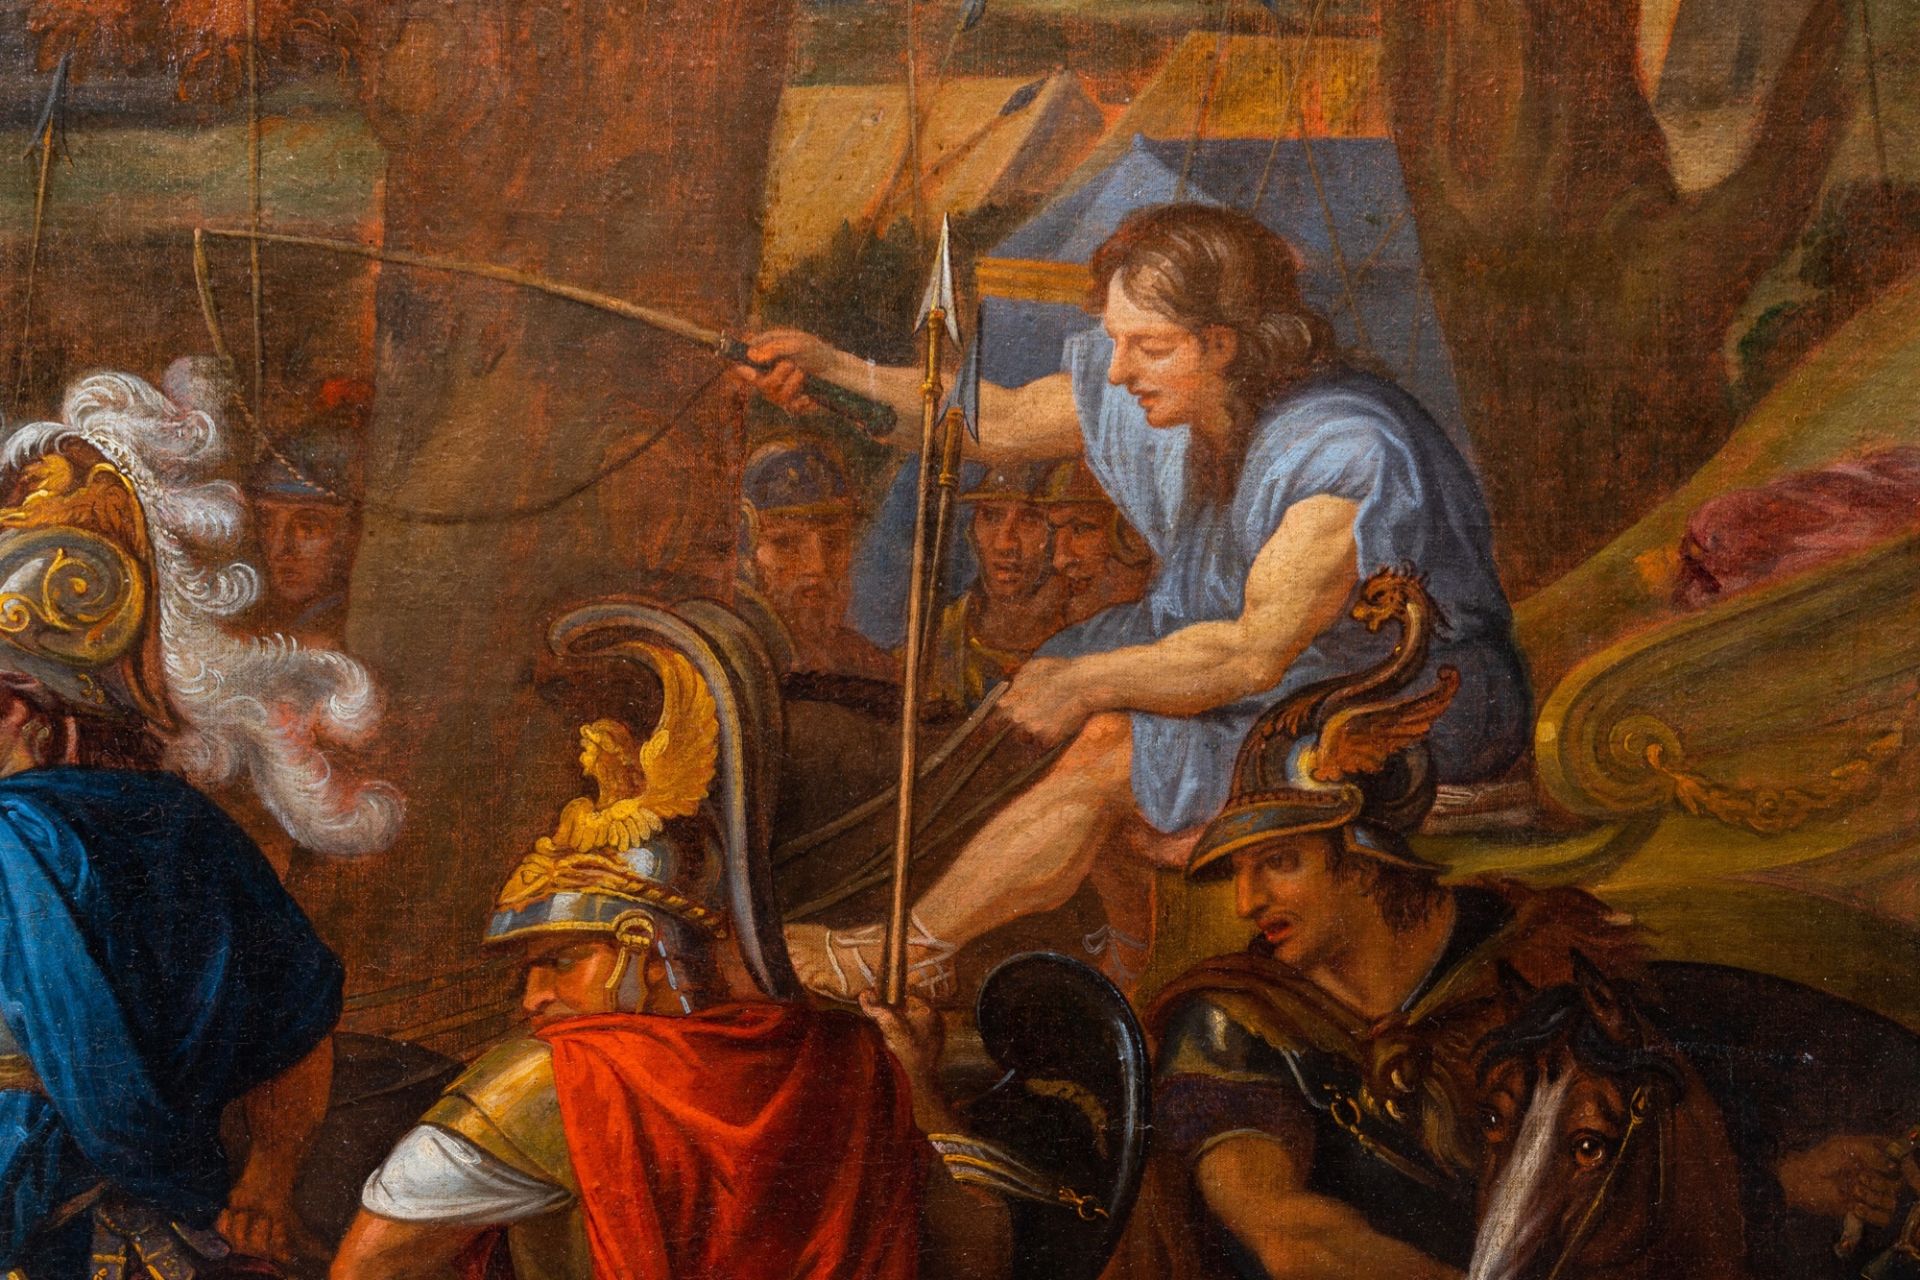 French school, workshop of Charles le Brun (1619-1690): Alexander and Poros in the Battle of Hydaspe - Image 12 of 24